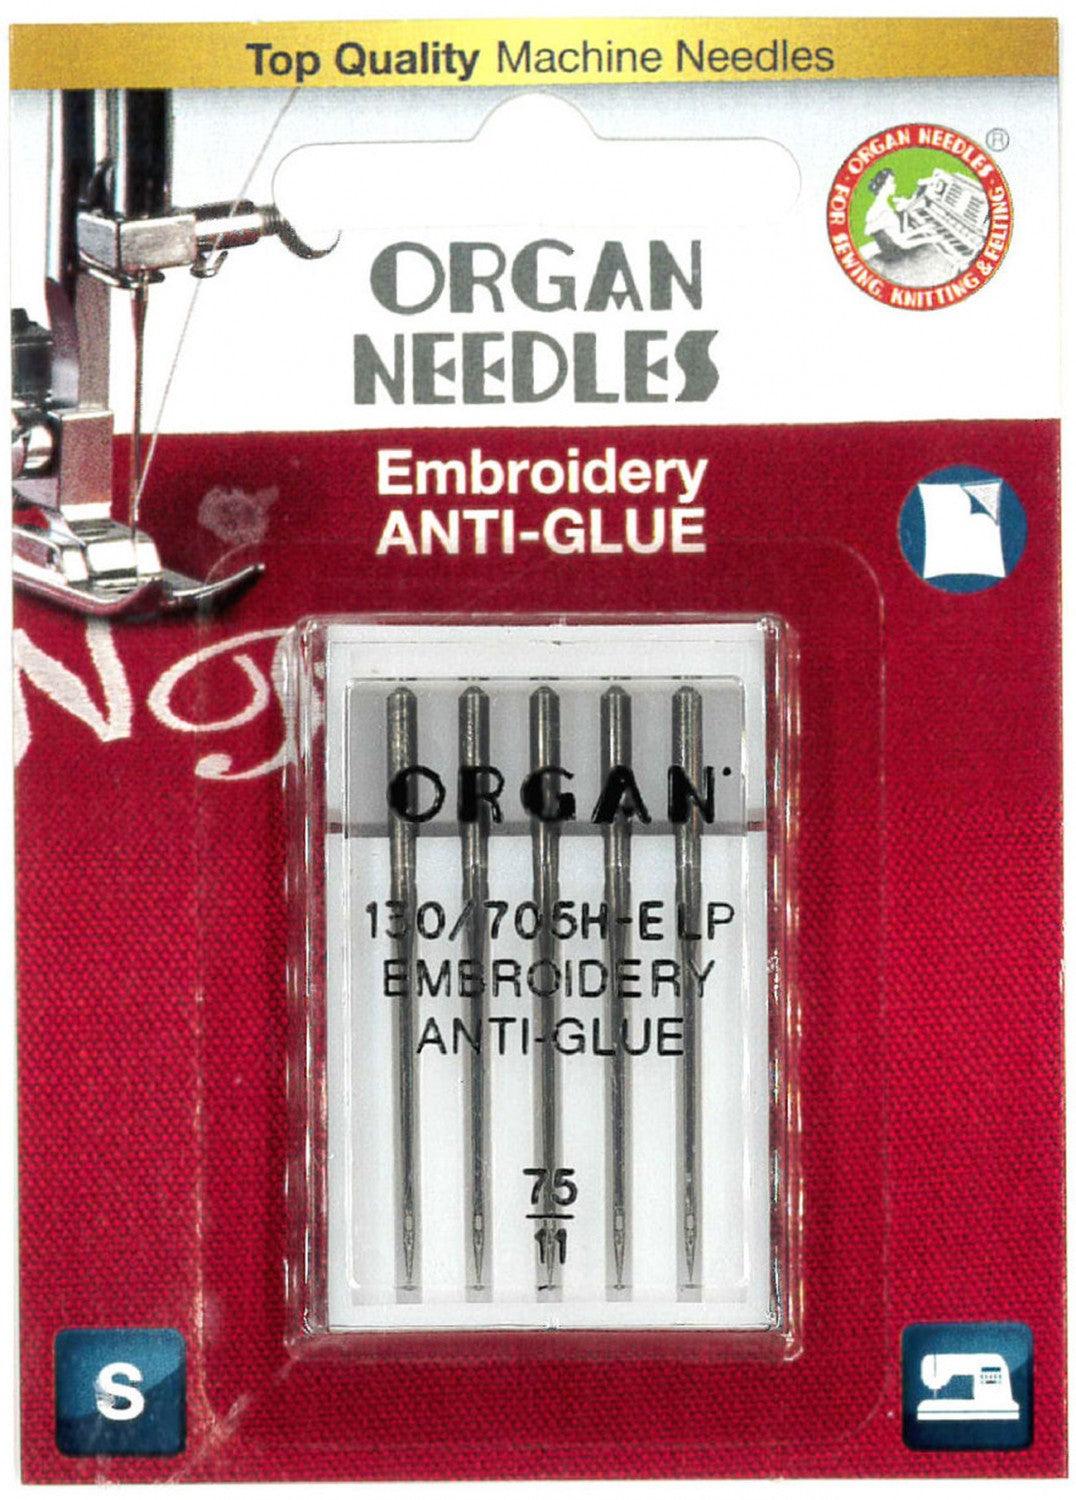 Organ Needle Embroidery Anti-Glue, 5 Needle Pack - Kawartha Quilting and Sewing LTD.